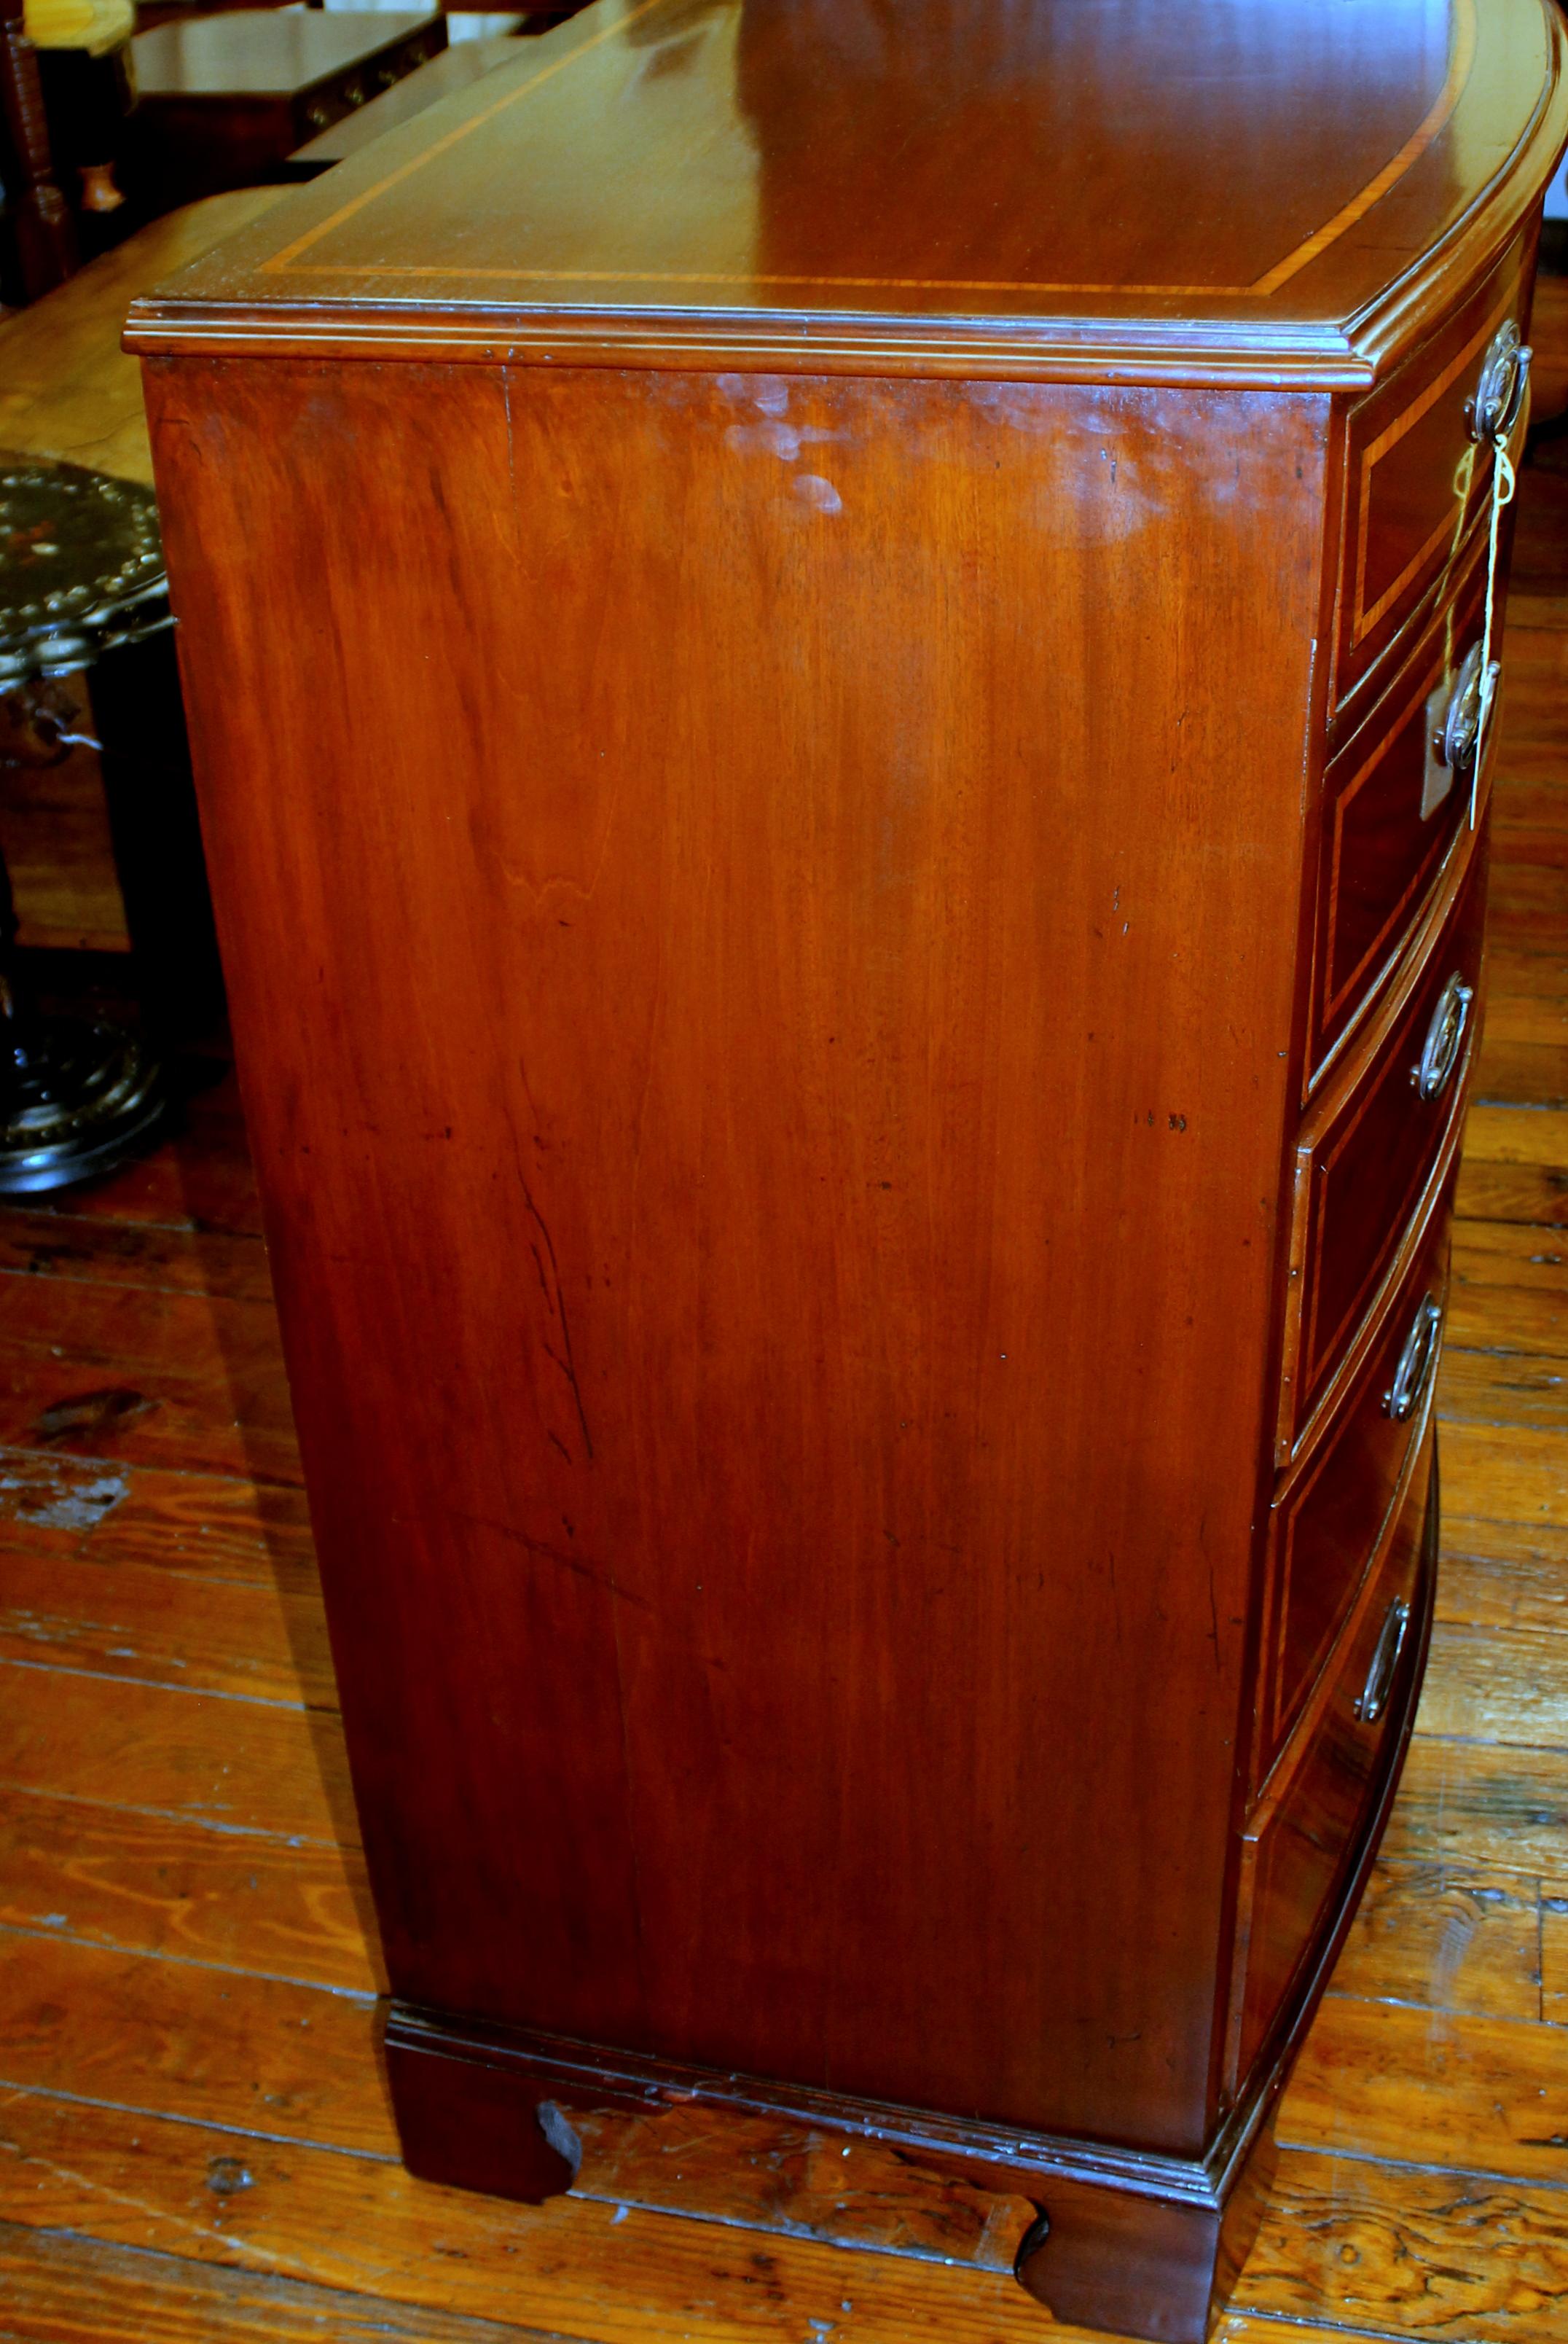 19th Century Antique English Geo. IV Tulipwood Inlaid Tall Figured Mahogany Bow-Front Chest